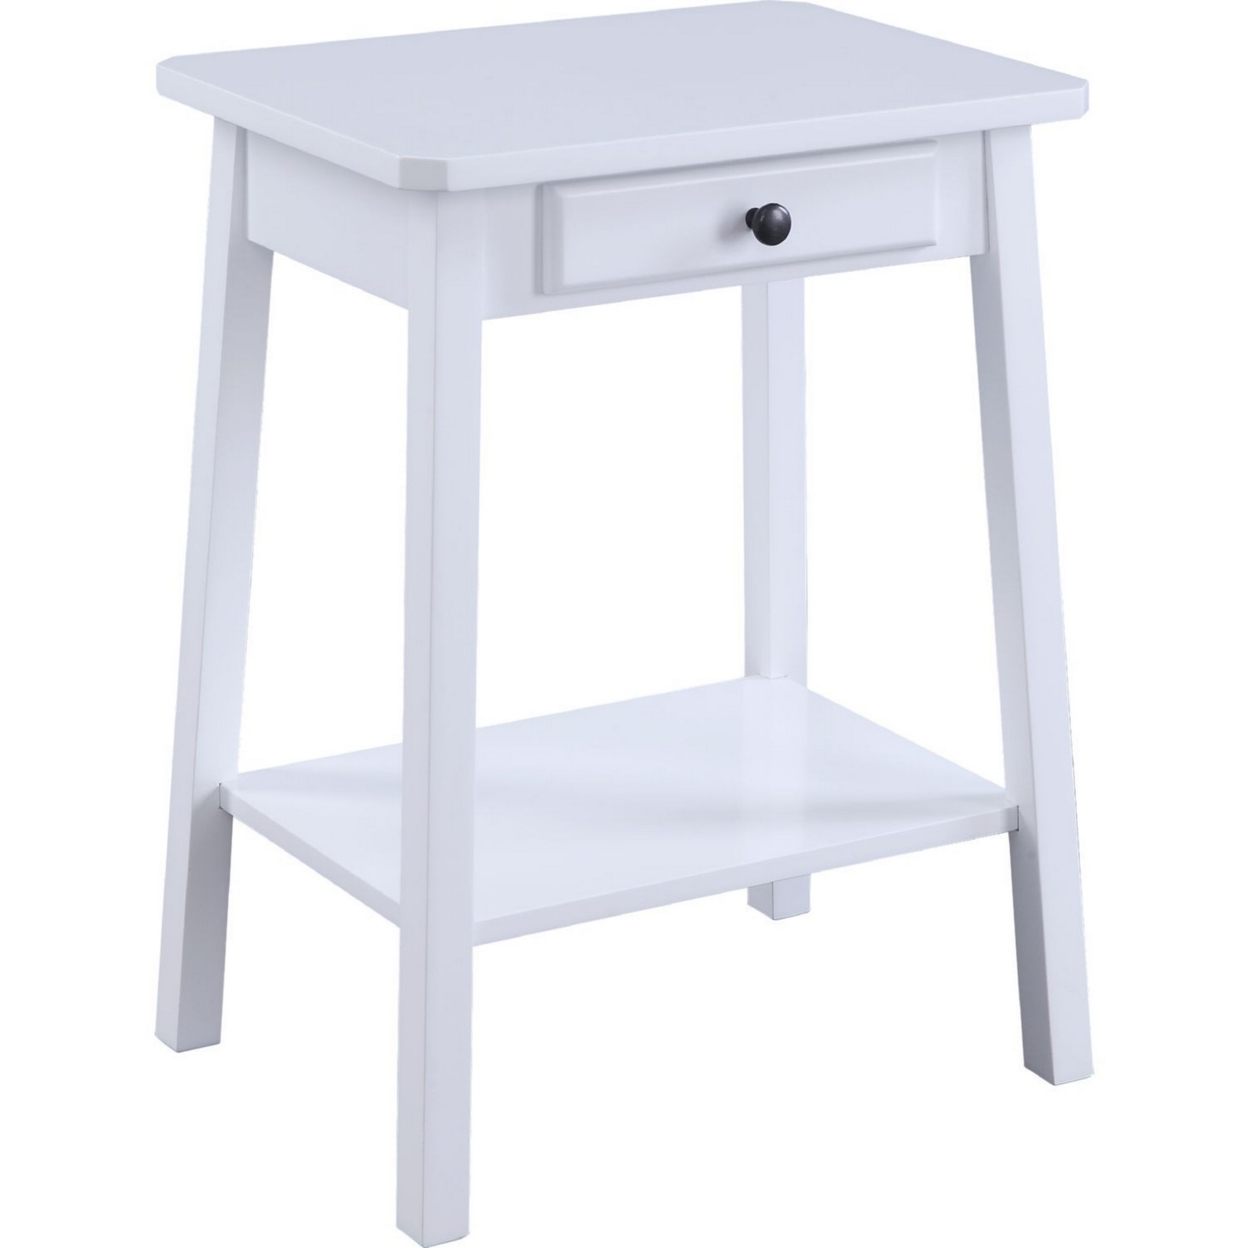 MDF Accent Table With 1 Drawer And Open Shelf, White- Saltoro Sherpi